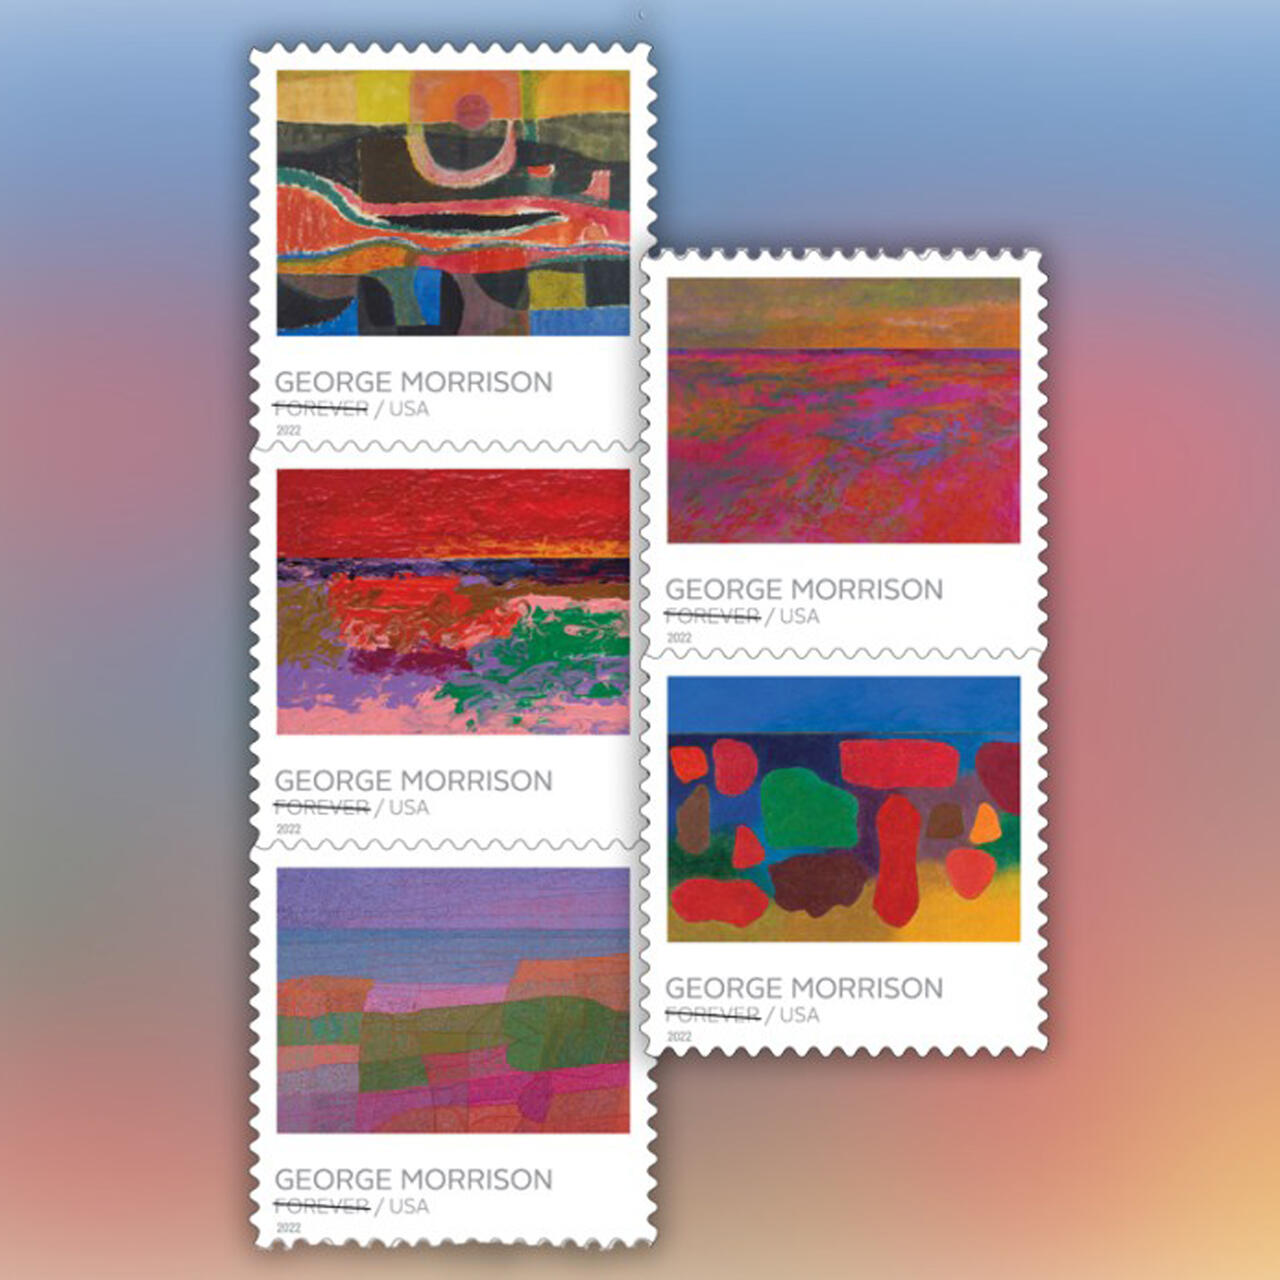 George Morrison's Stamps